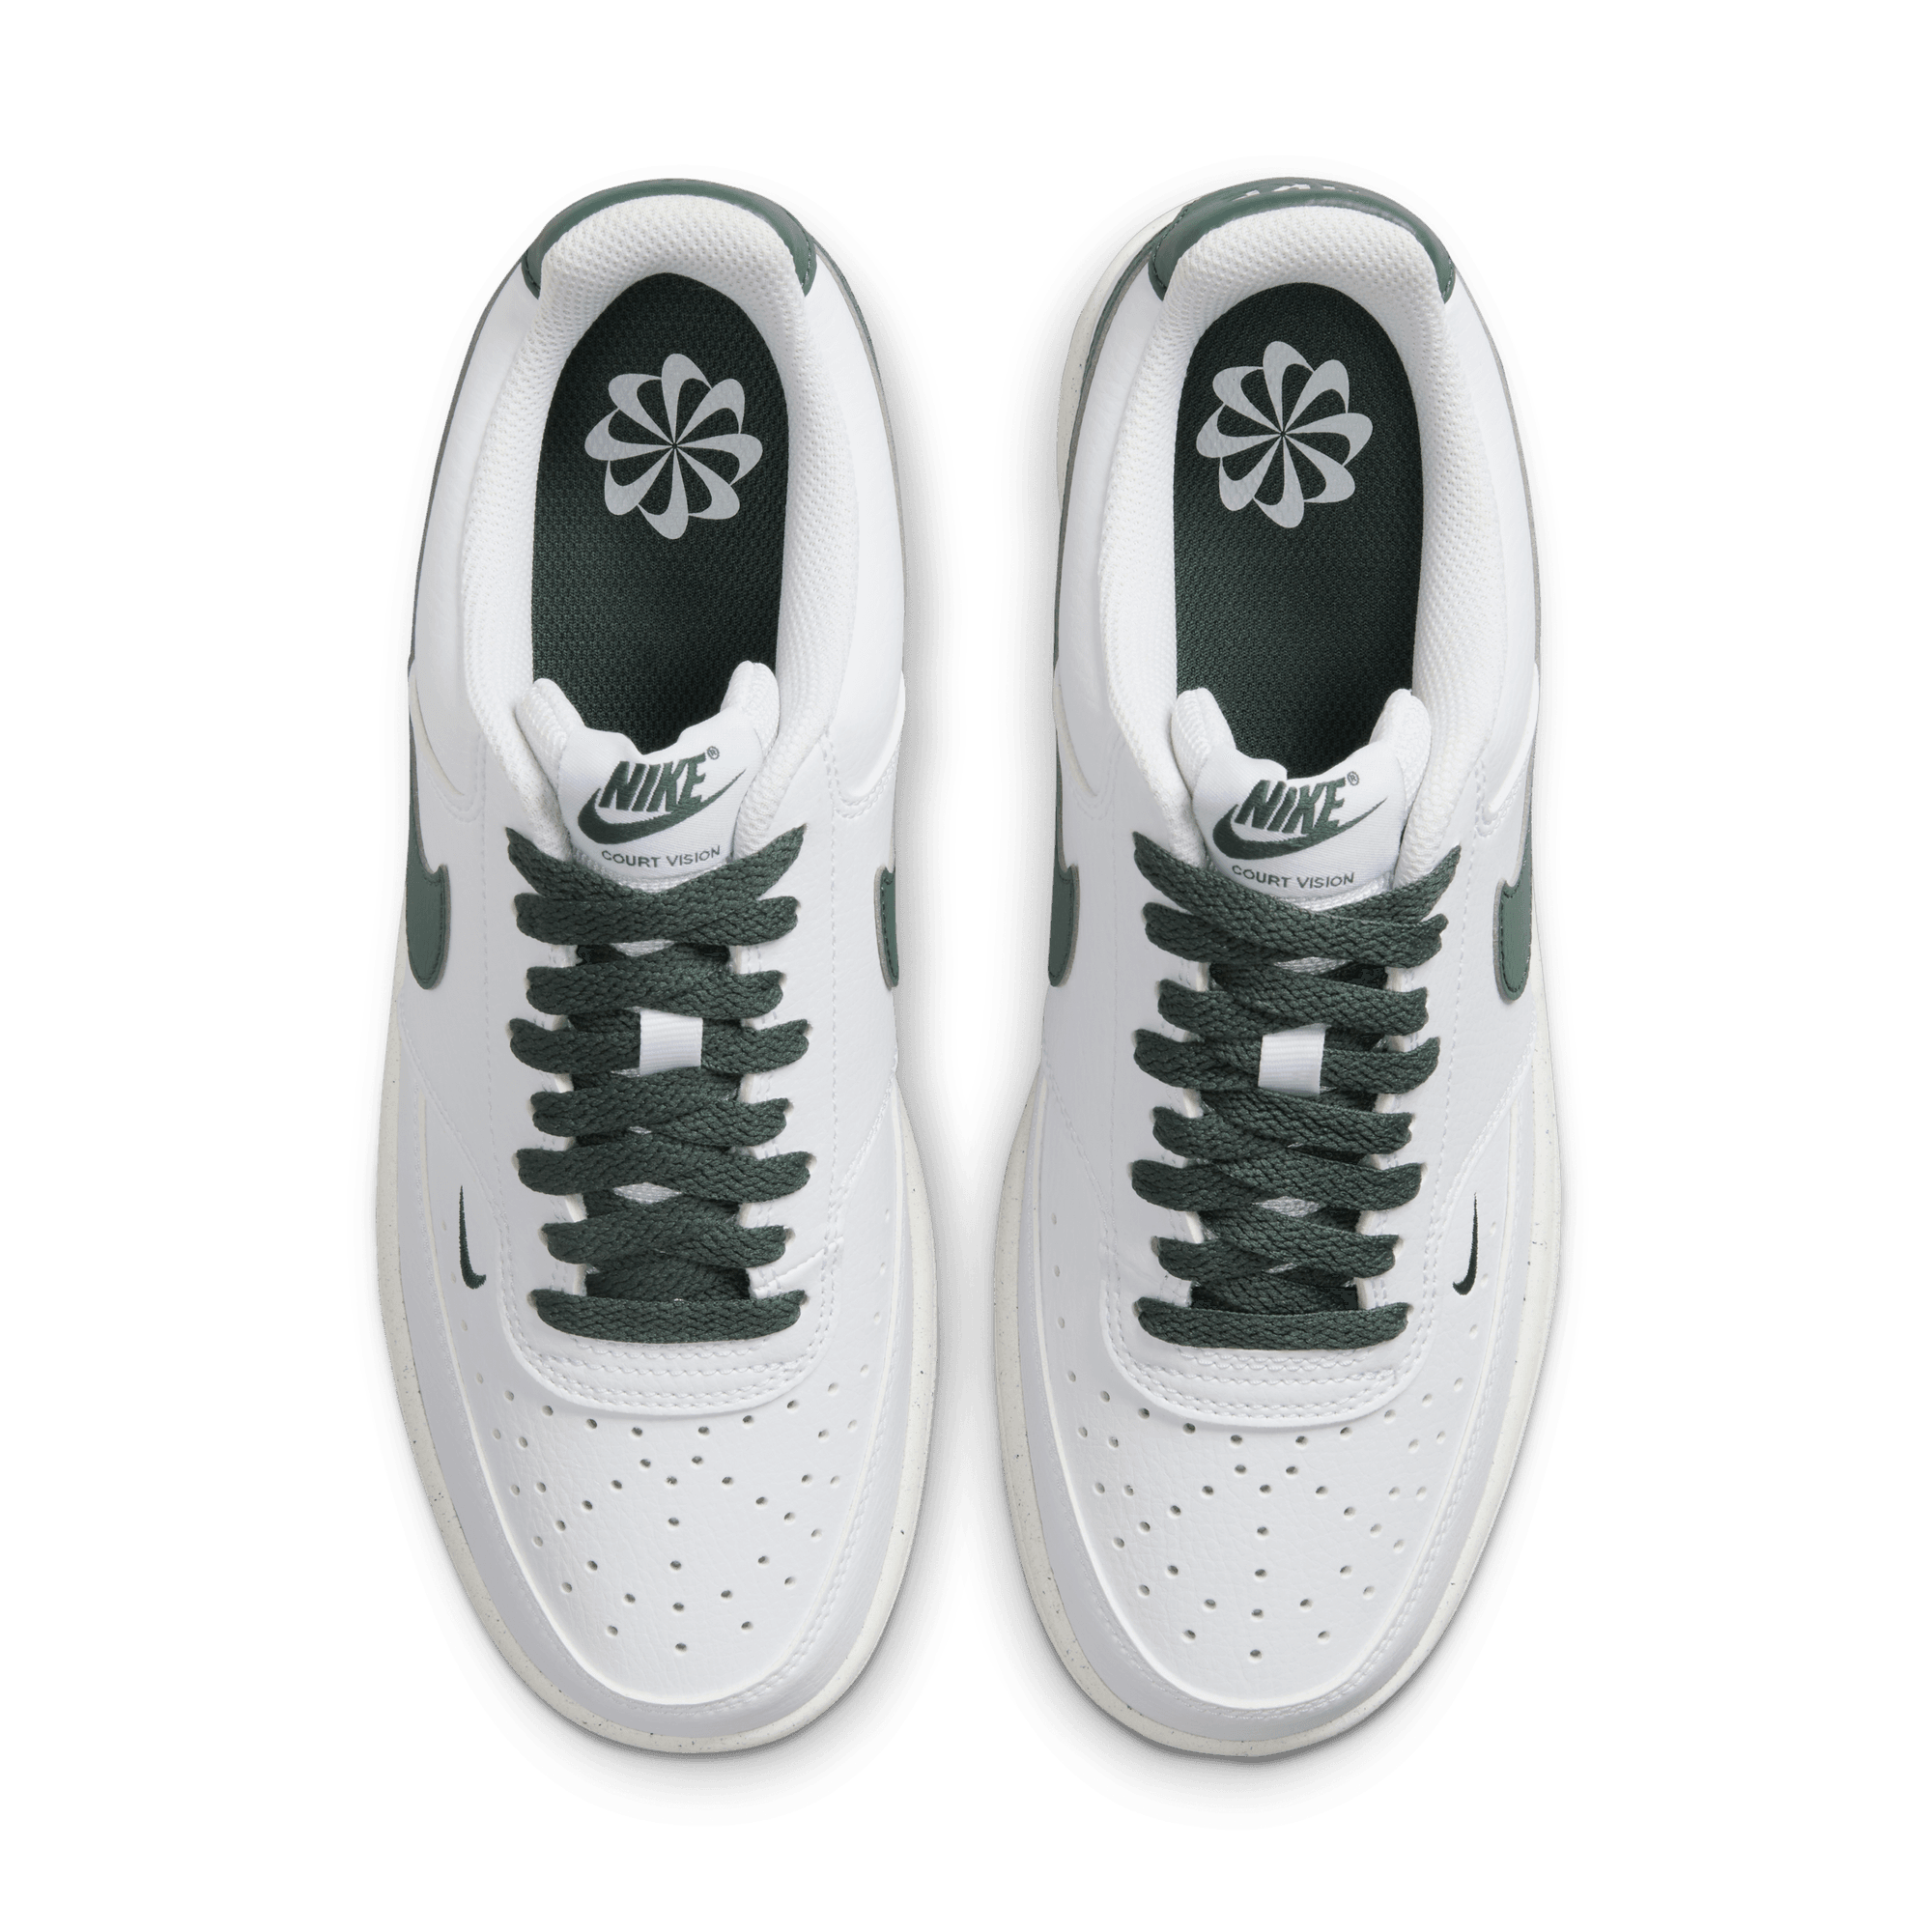 NIKE COURT VISION LOW NEXT NATURE WOMEN'S SHOES